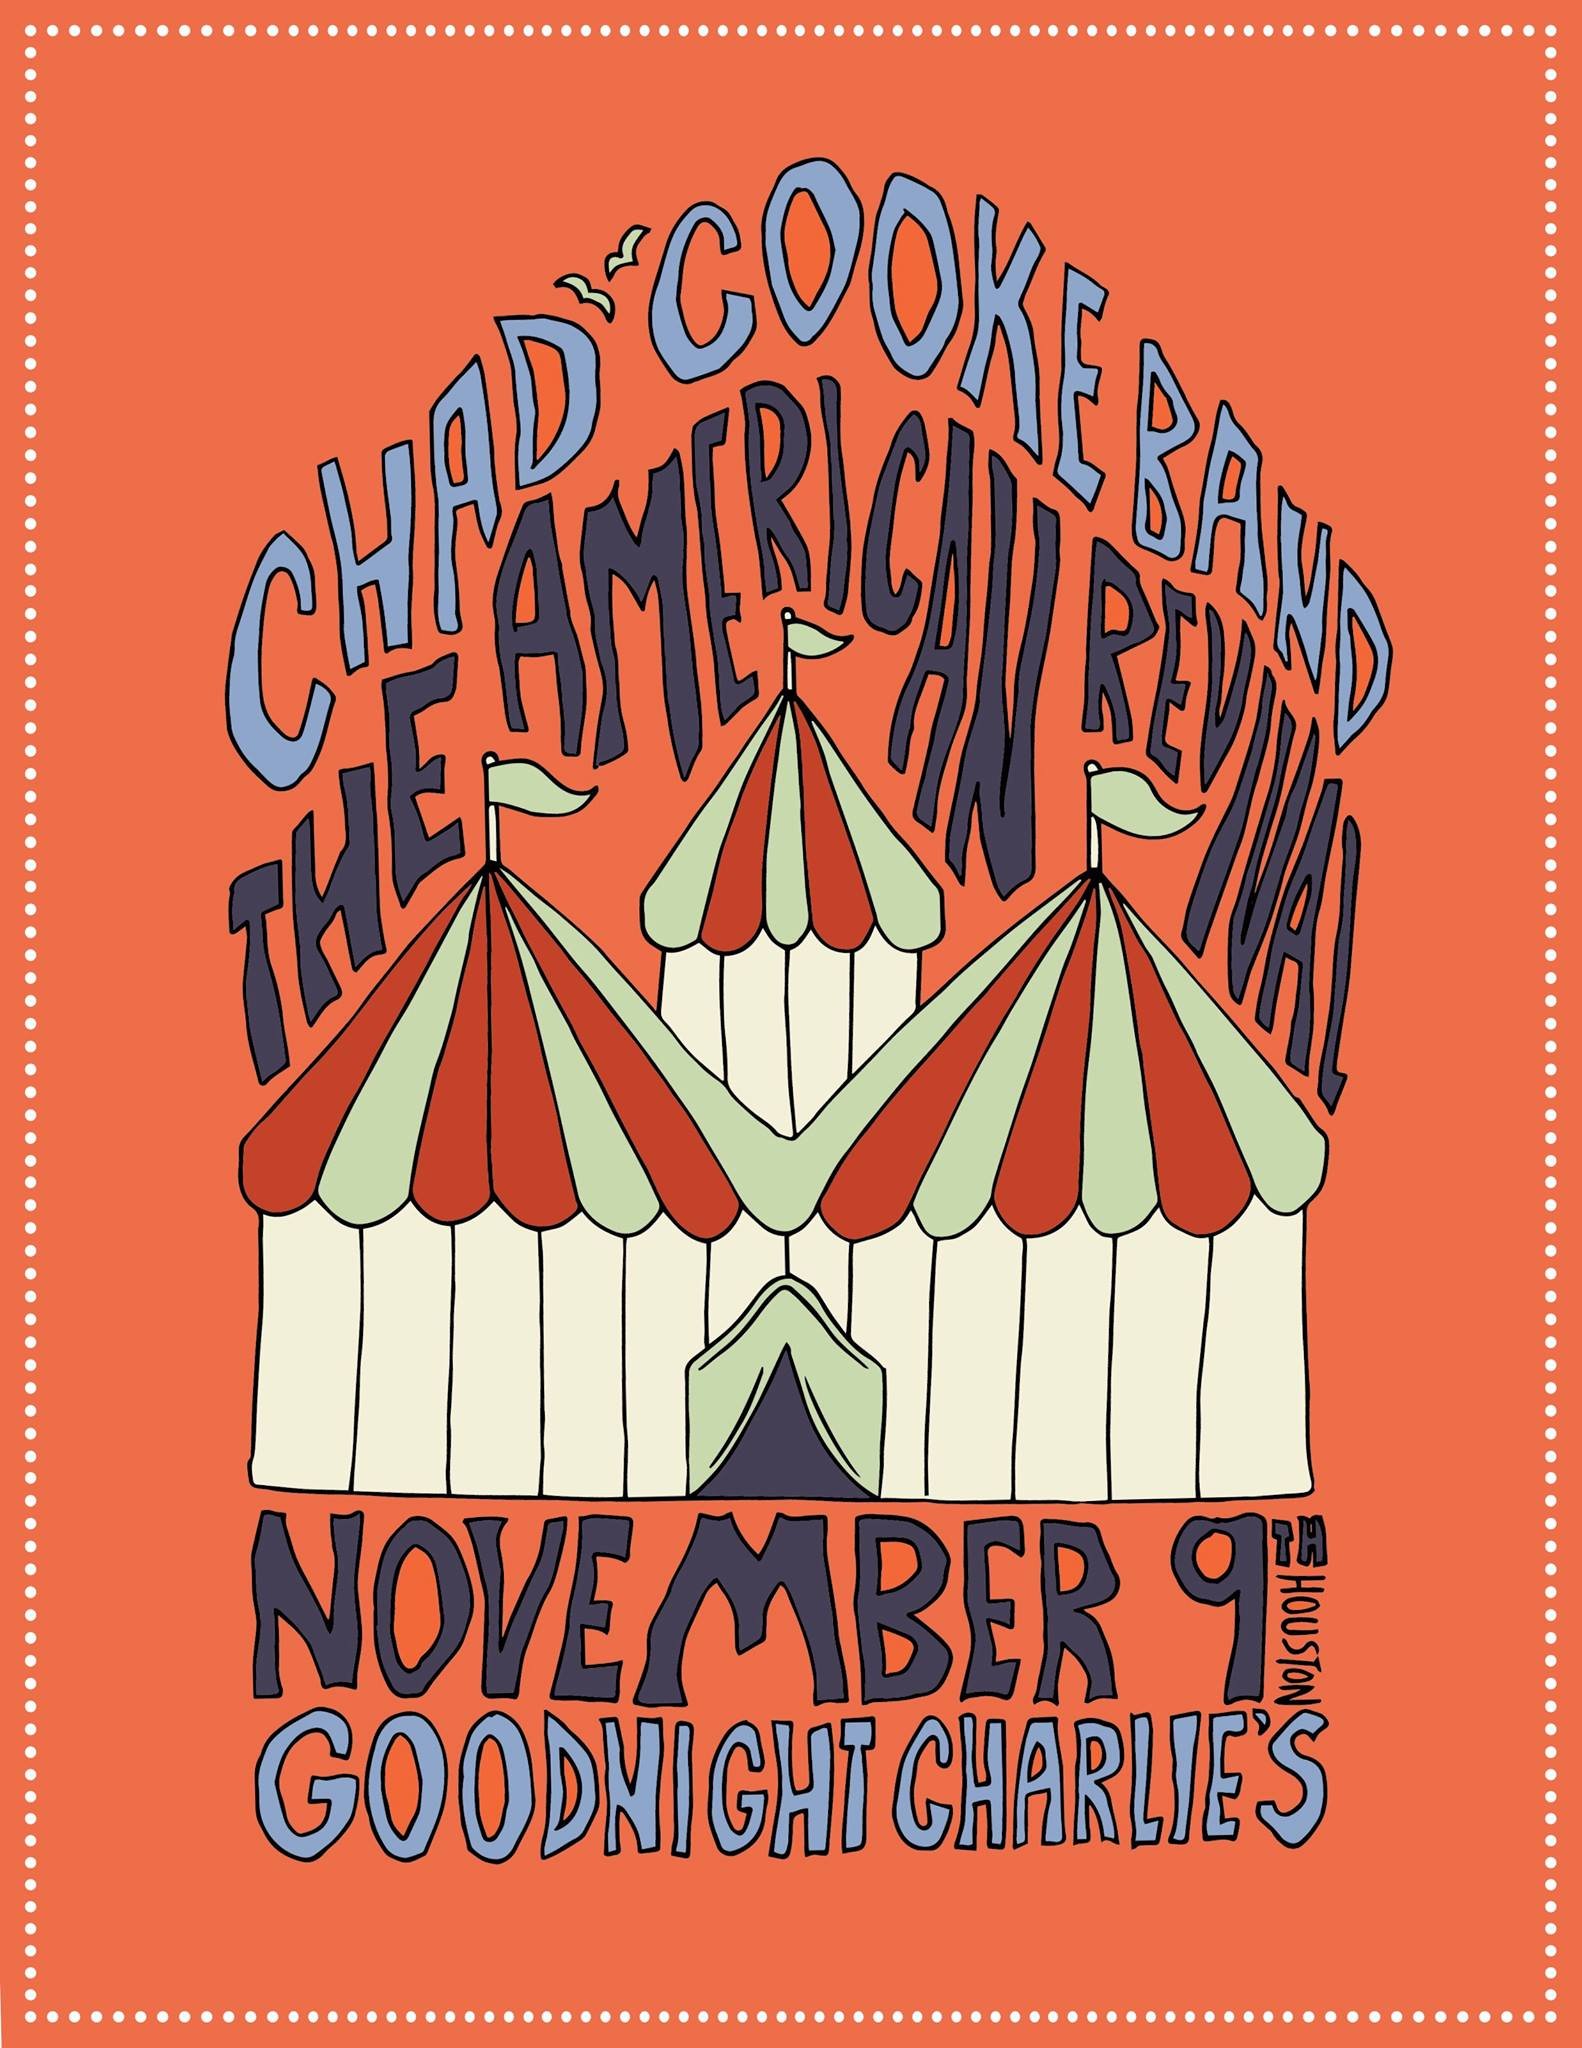 Goodnight Charlie's Show Poster